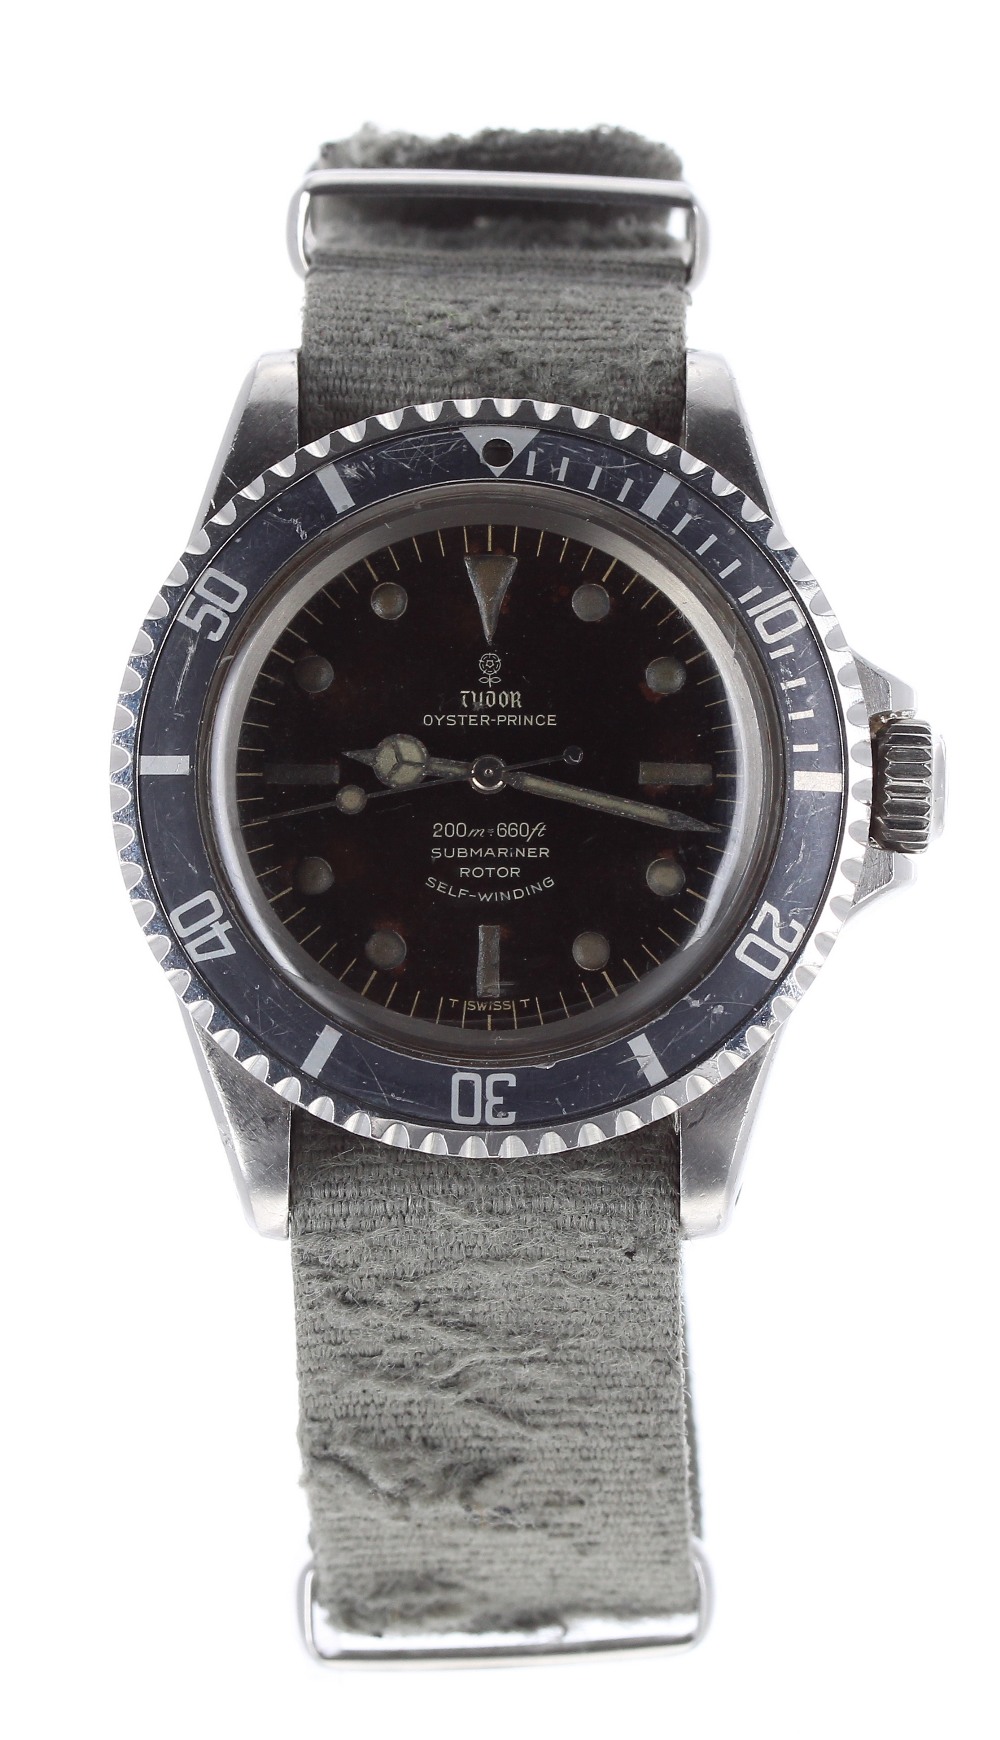 Rare and interesting Tudor Oyster-Prince Military Submariner Rotor Self-Winding stainless steel